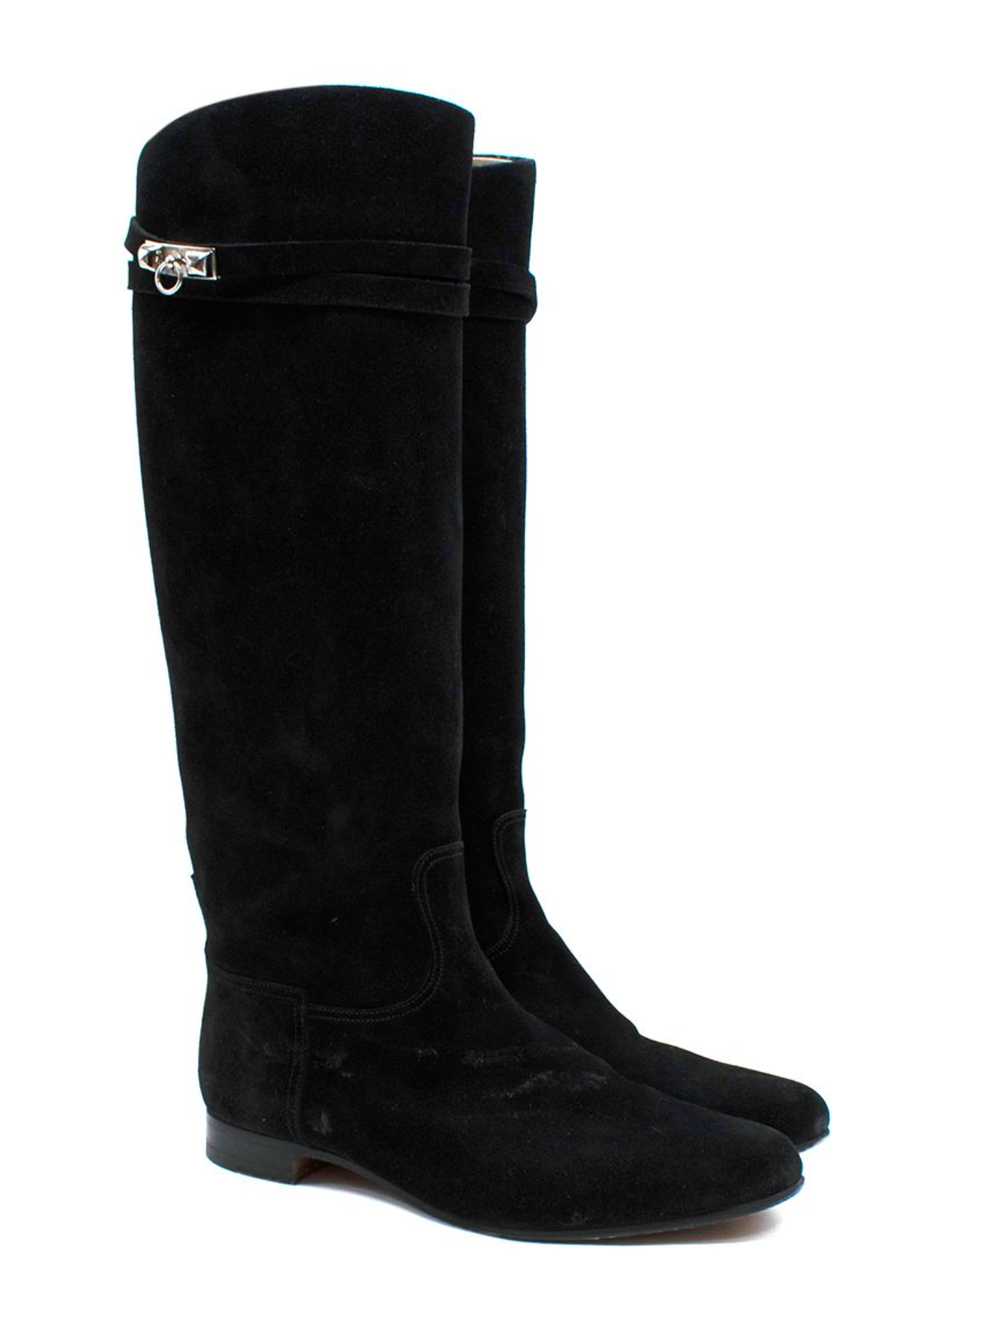 Managed by hewi Black Suede Jumping Boots - image 1